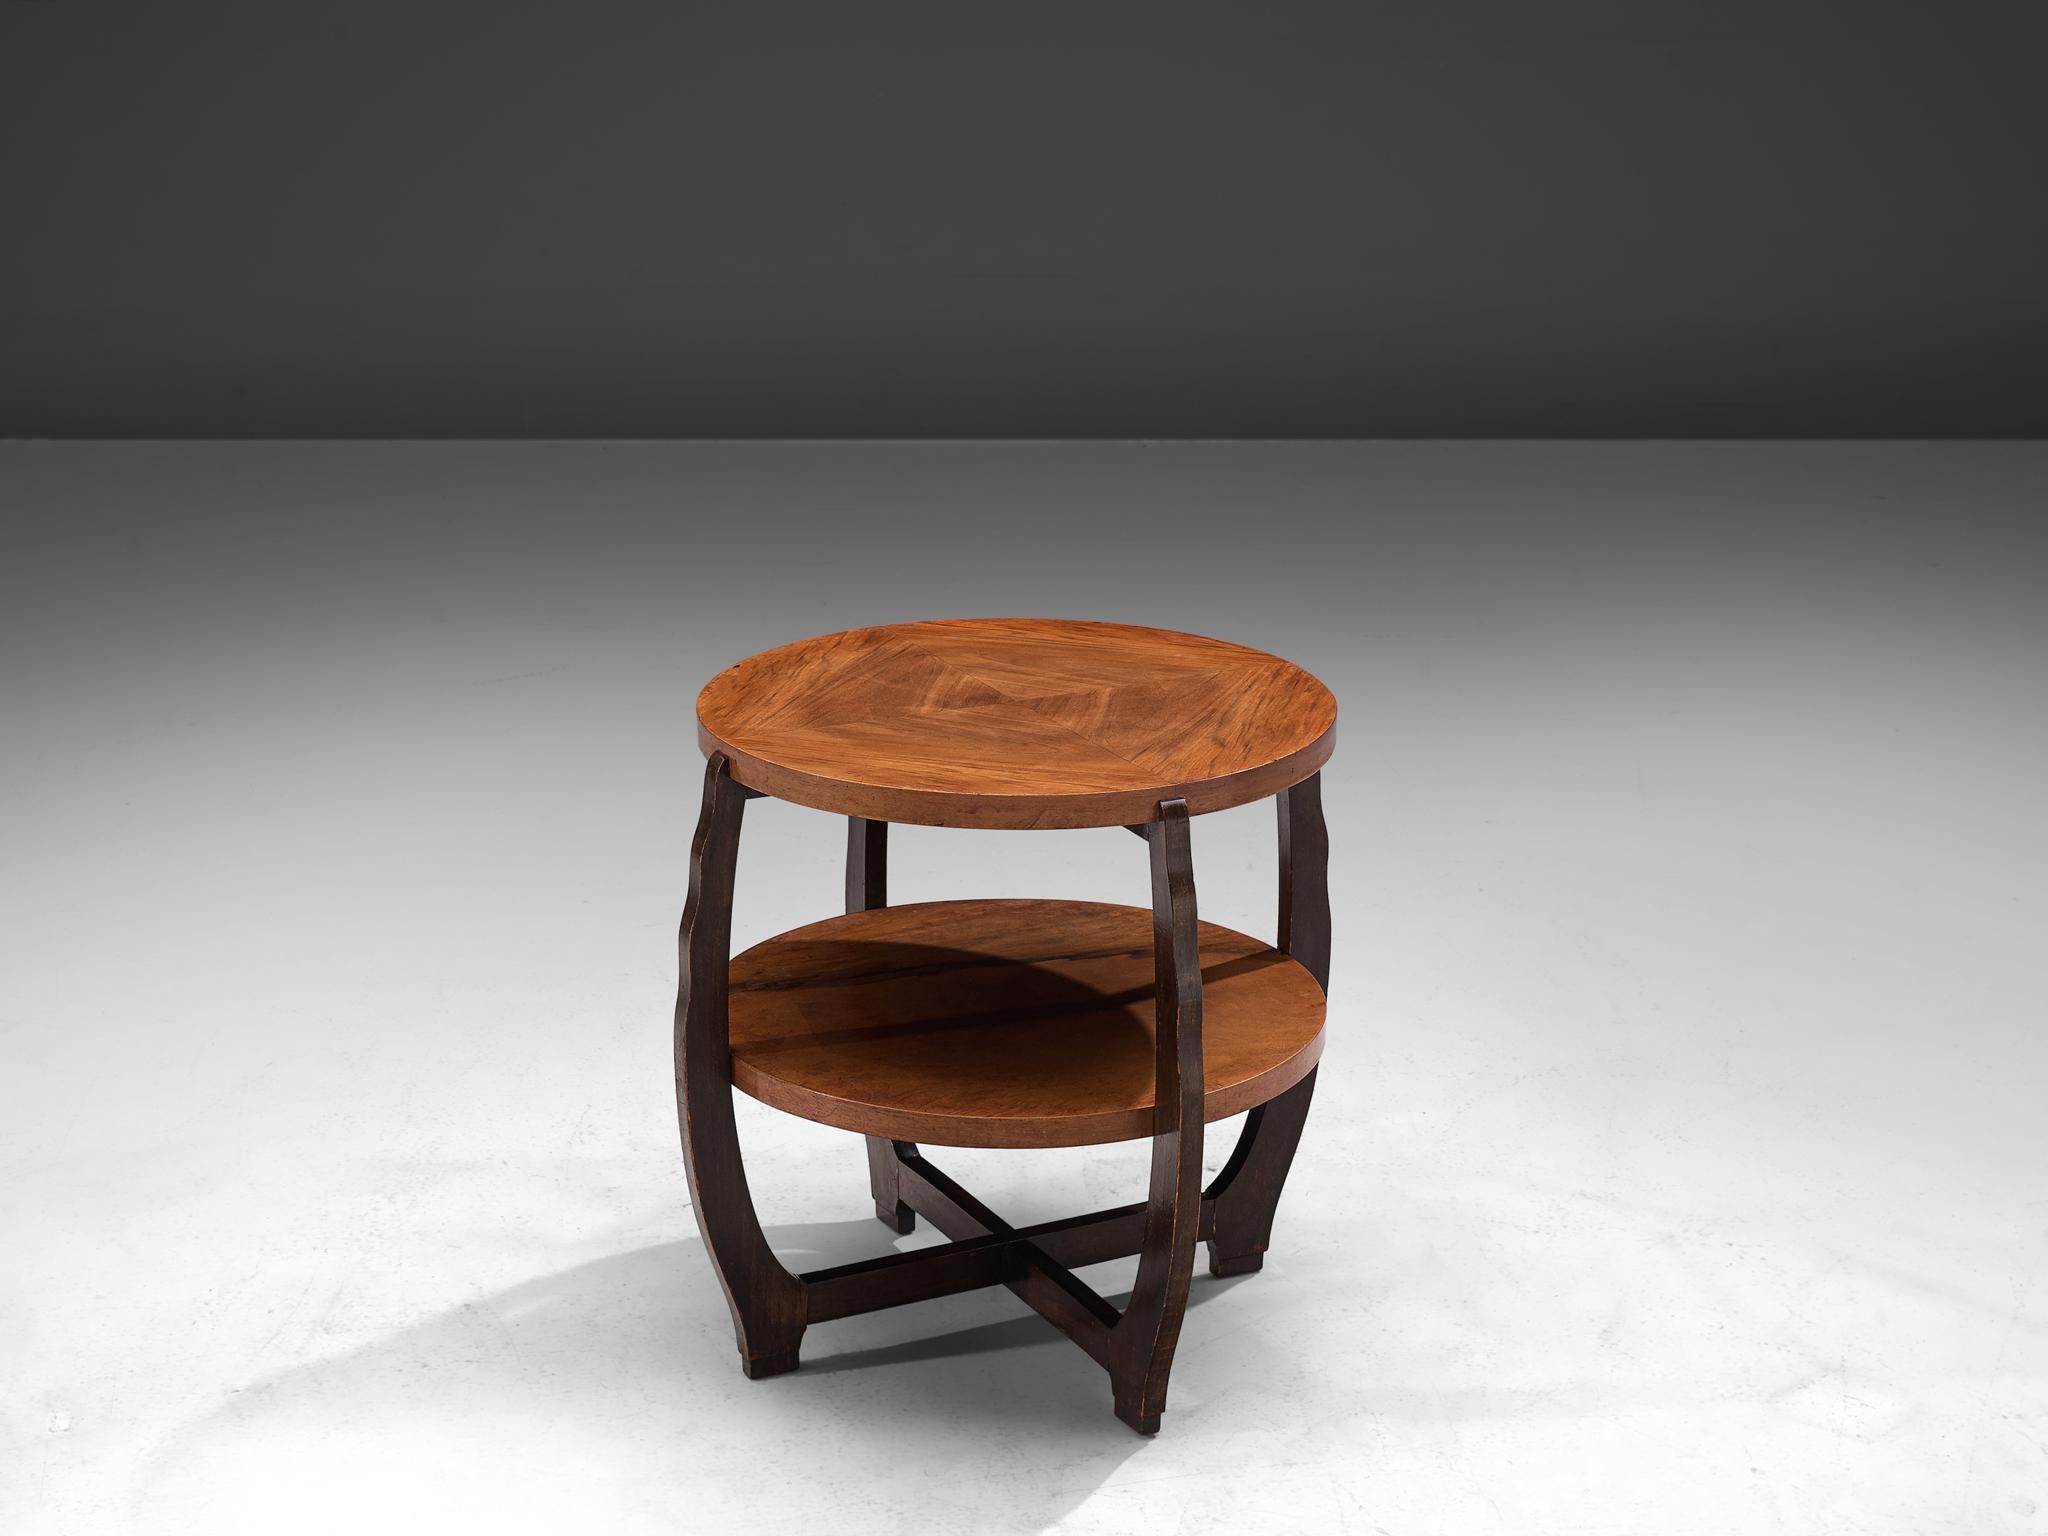 Side table, walnut, France, 1940s

This side table of French origin is created in one of the most influential periods for the arts namely the Art Deco Movement. Its cross-shaped frame with bent sides holds the table tops firmly in place. Note the